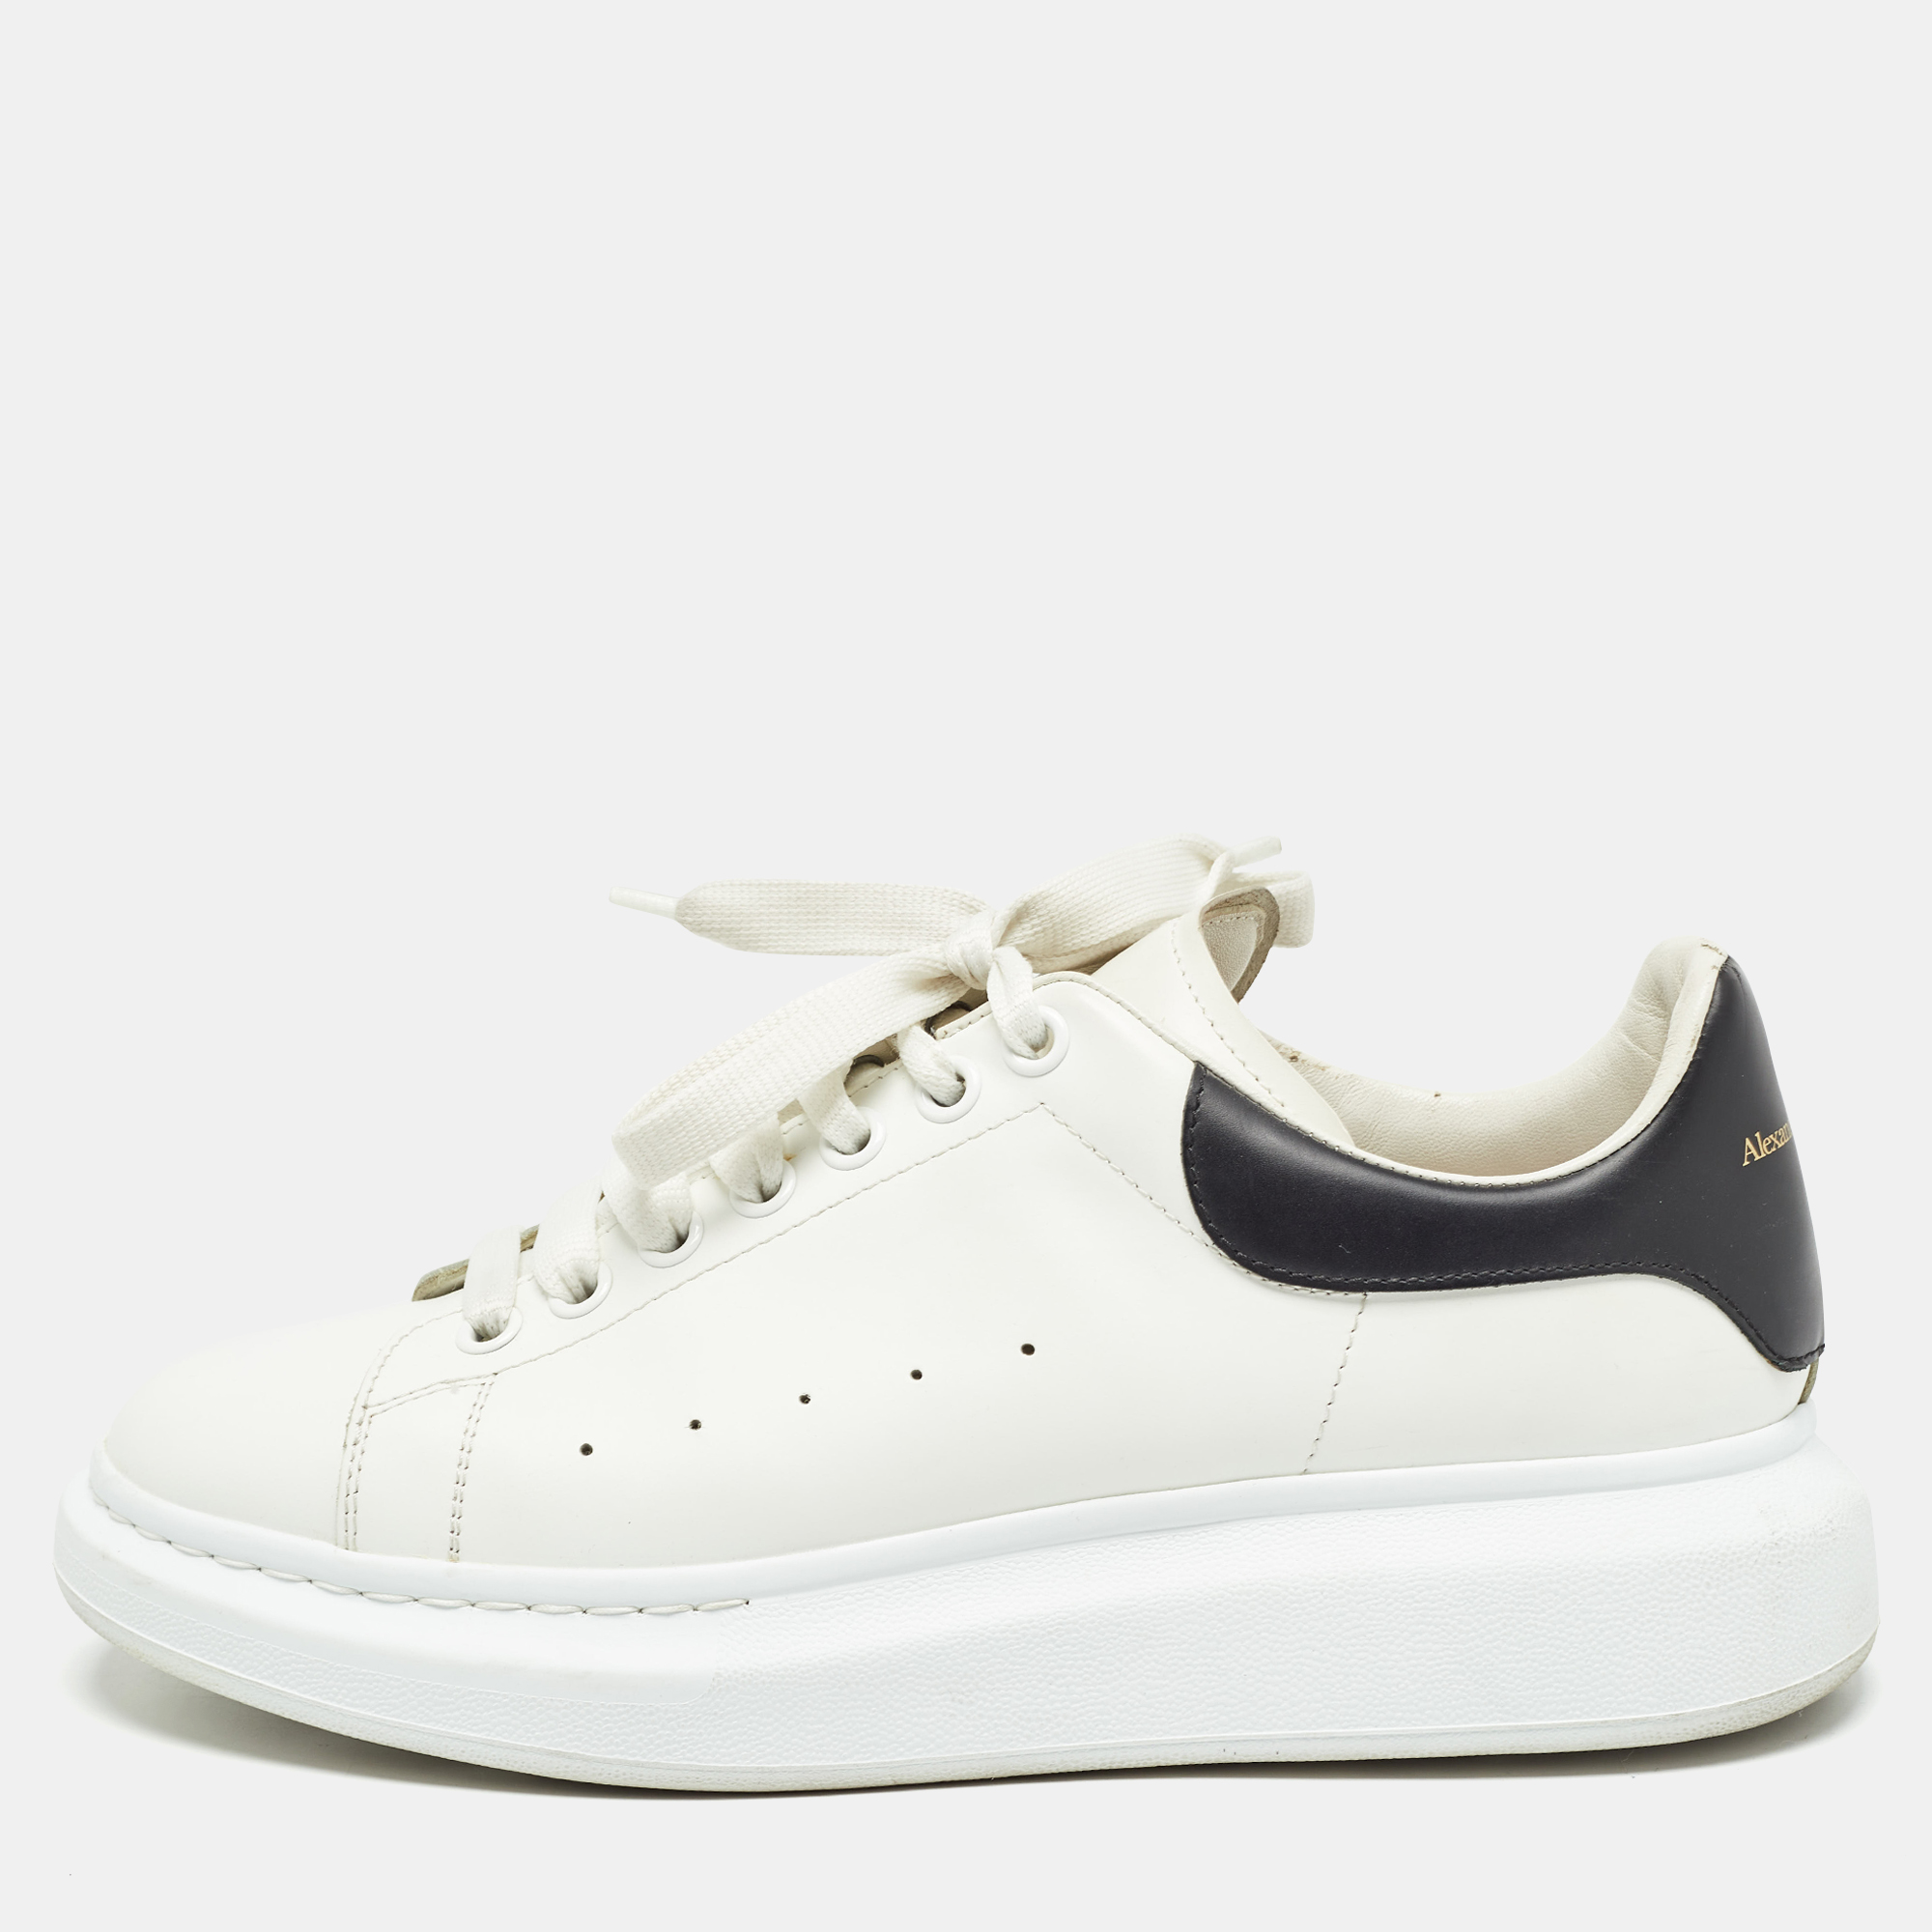 Alexander mcqueen white leather larry sneakers size 42.5